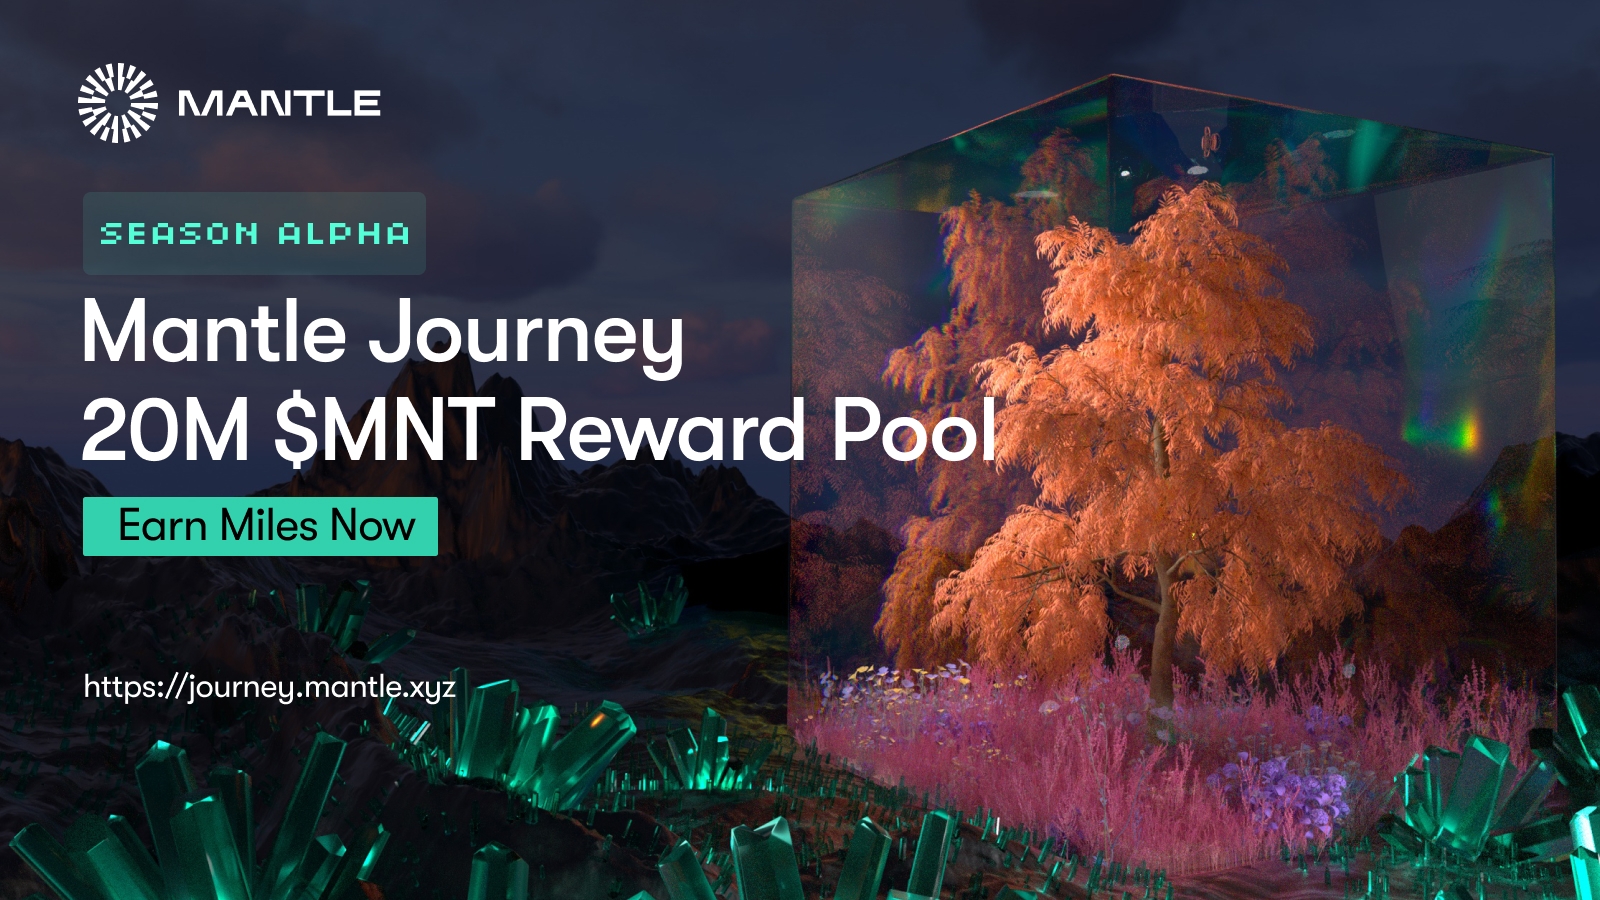 Mantle Journey: Create Your Profile to Access the Season Alpha 20M $MNT Reward Pool 